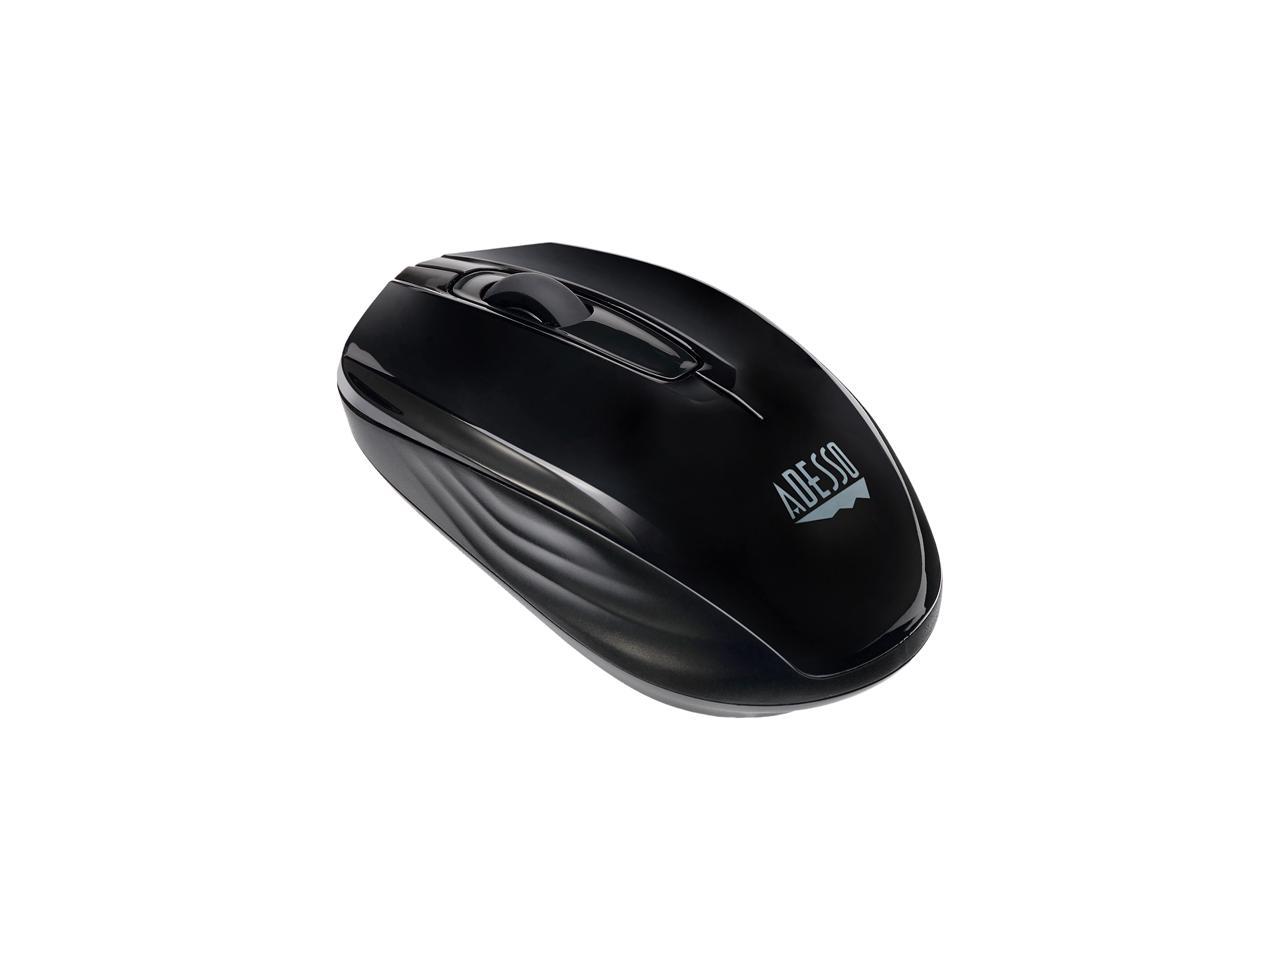 ADESSO IMOUSES50 ADESSO IMOUSES50 2.4GHZ WIRELESS MINI OPTICAL MOUSE. 1200 DPI, BATTERY SAVING ON